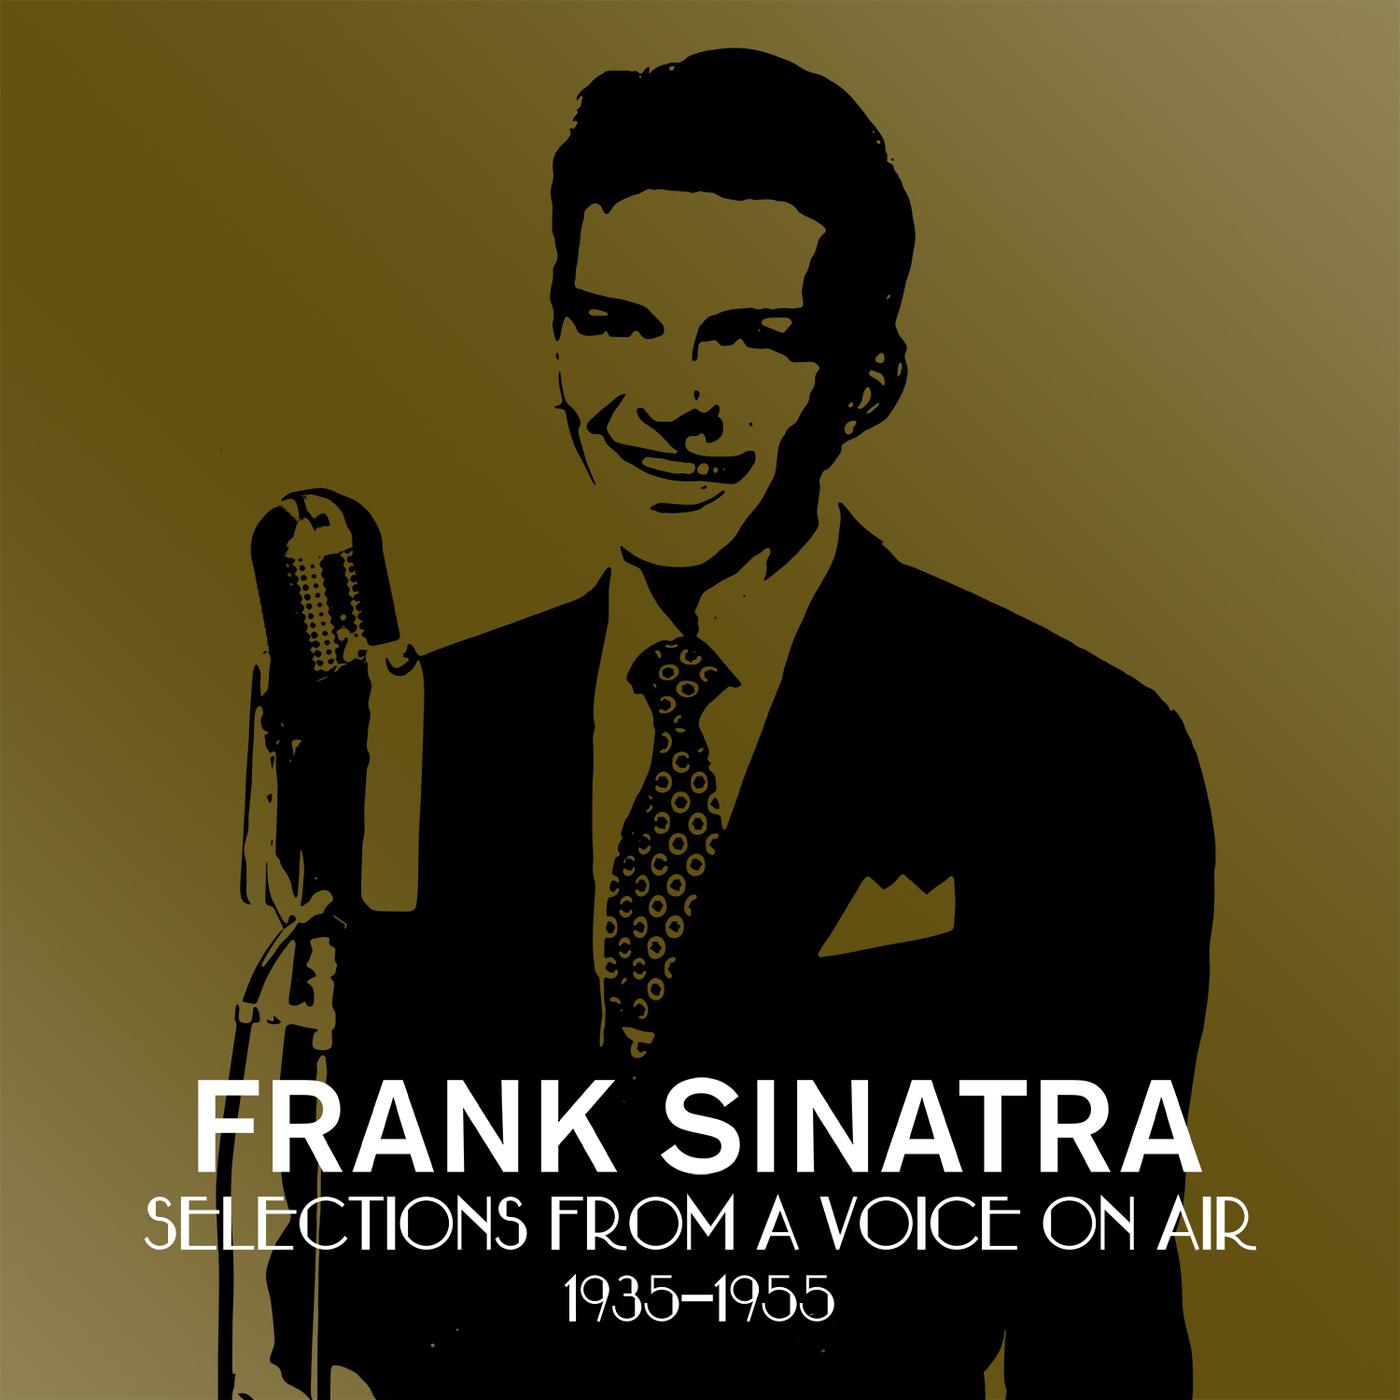 Songs by Sinatra Show Opening: Night and Day / I'm an Old Cowhand / Tumblin' ***********